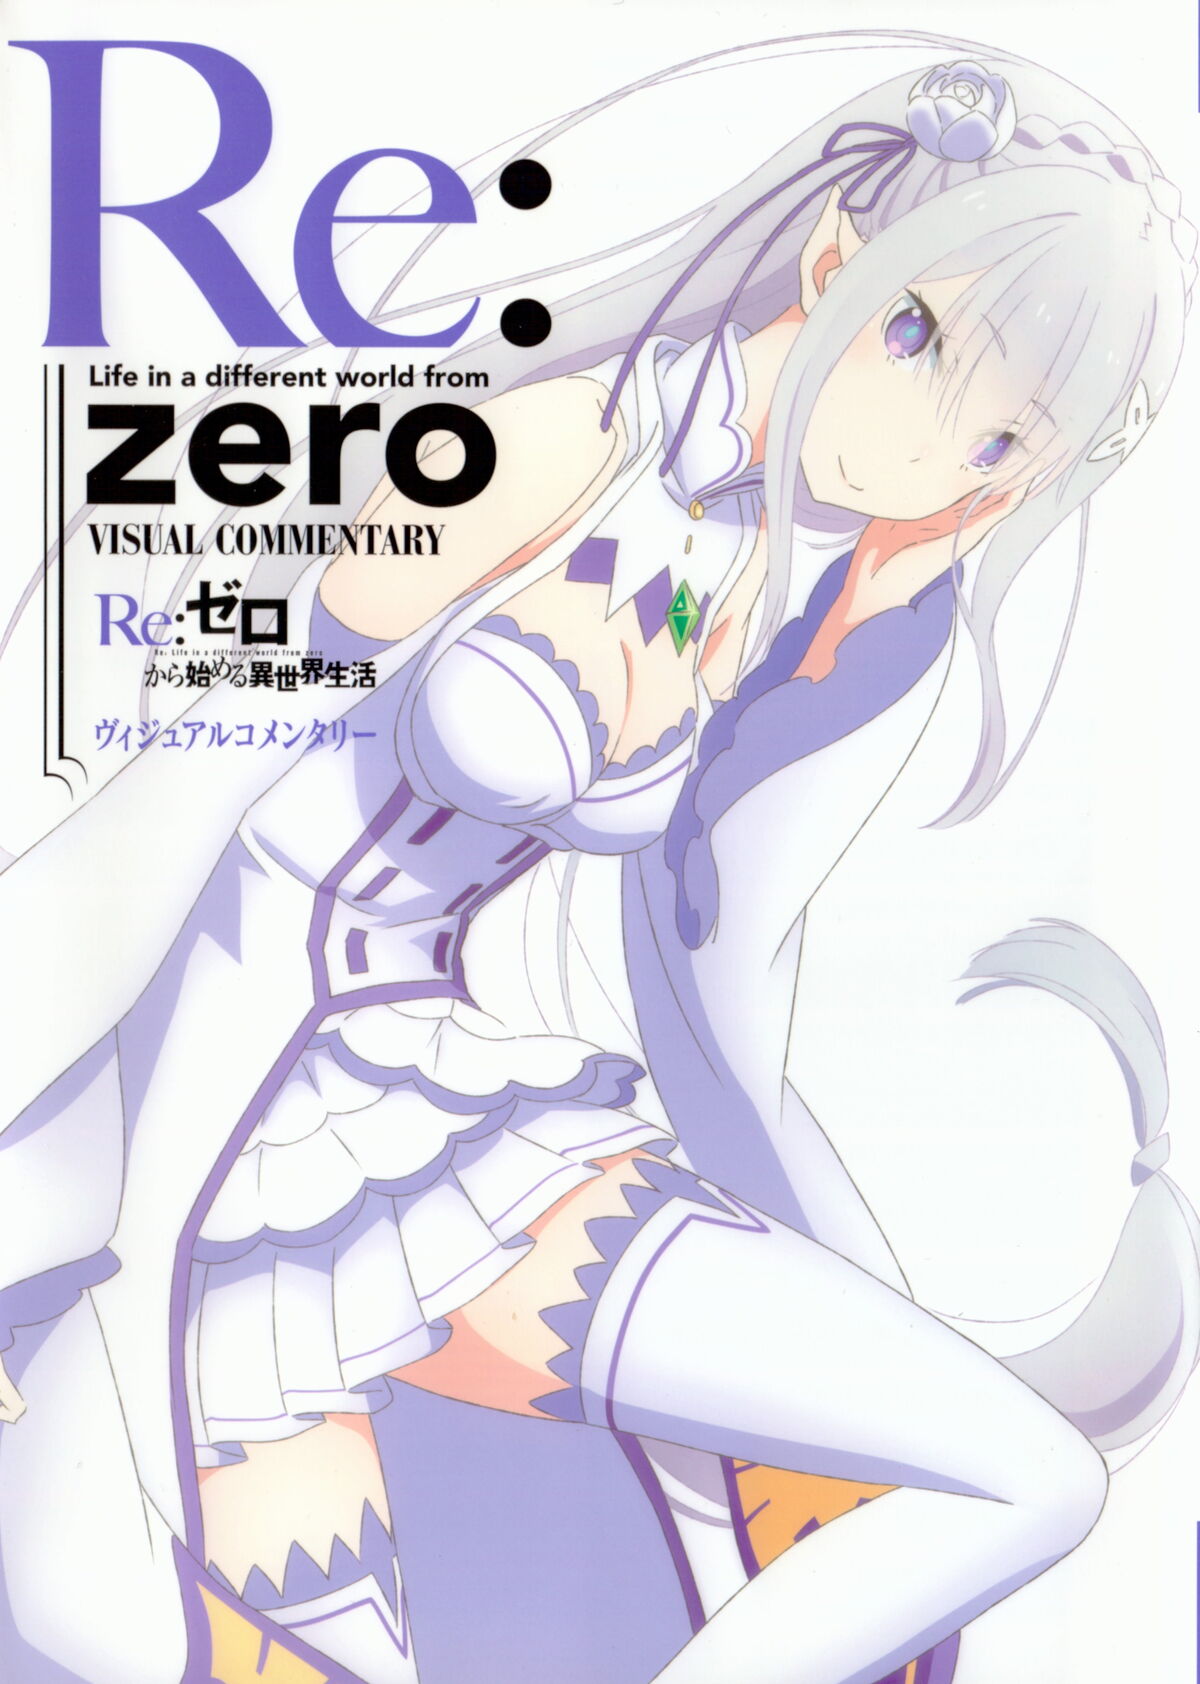 Discussion] Someone know the reading order of re zero if stories I